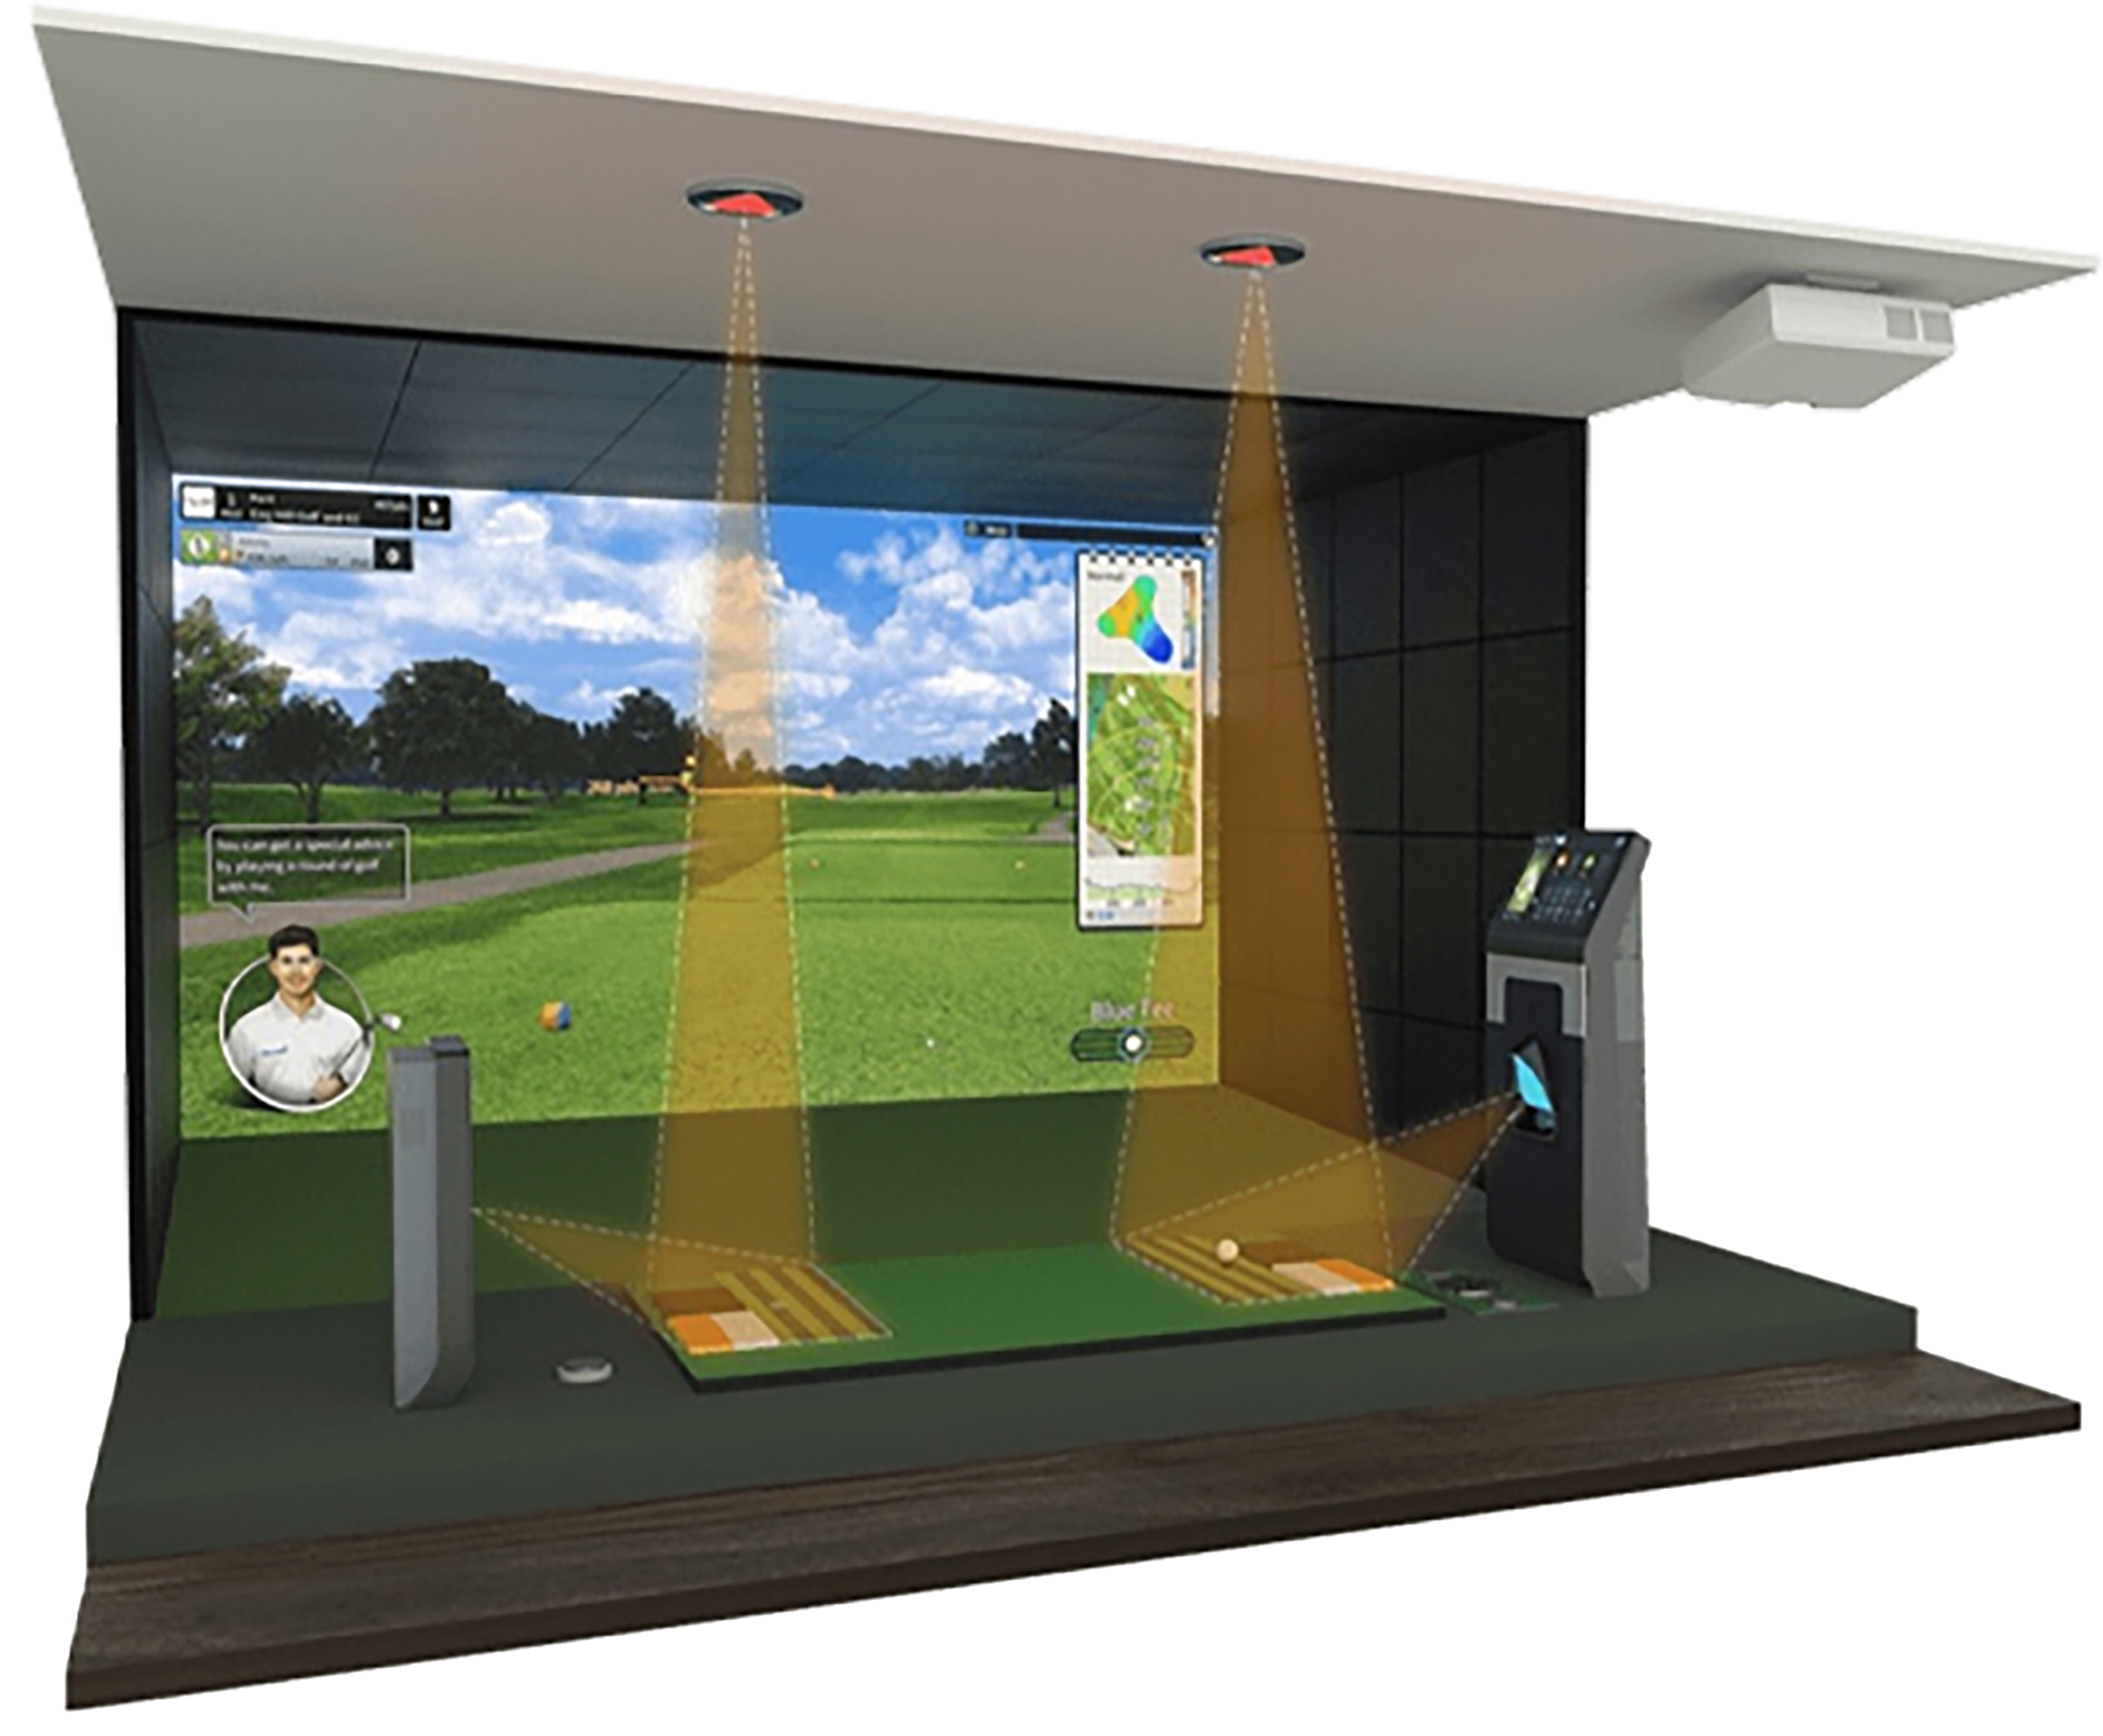 Our simulators offer insightful data during practice sessions, including spin rate, loft angle, and flight path. This technology helps you understand your game better and offers pathways to improvement.